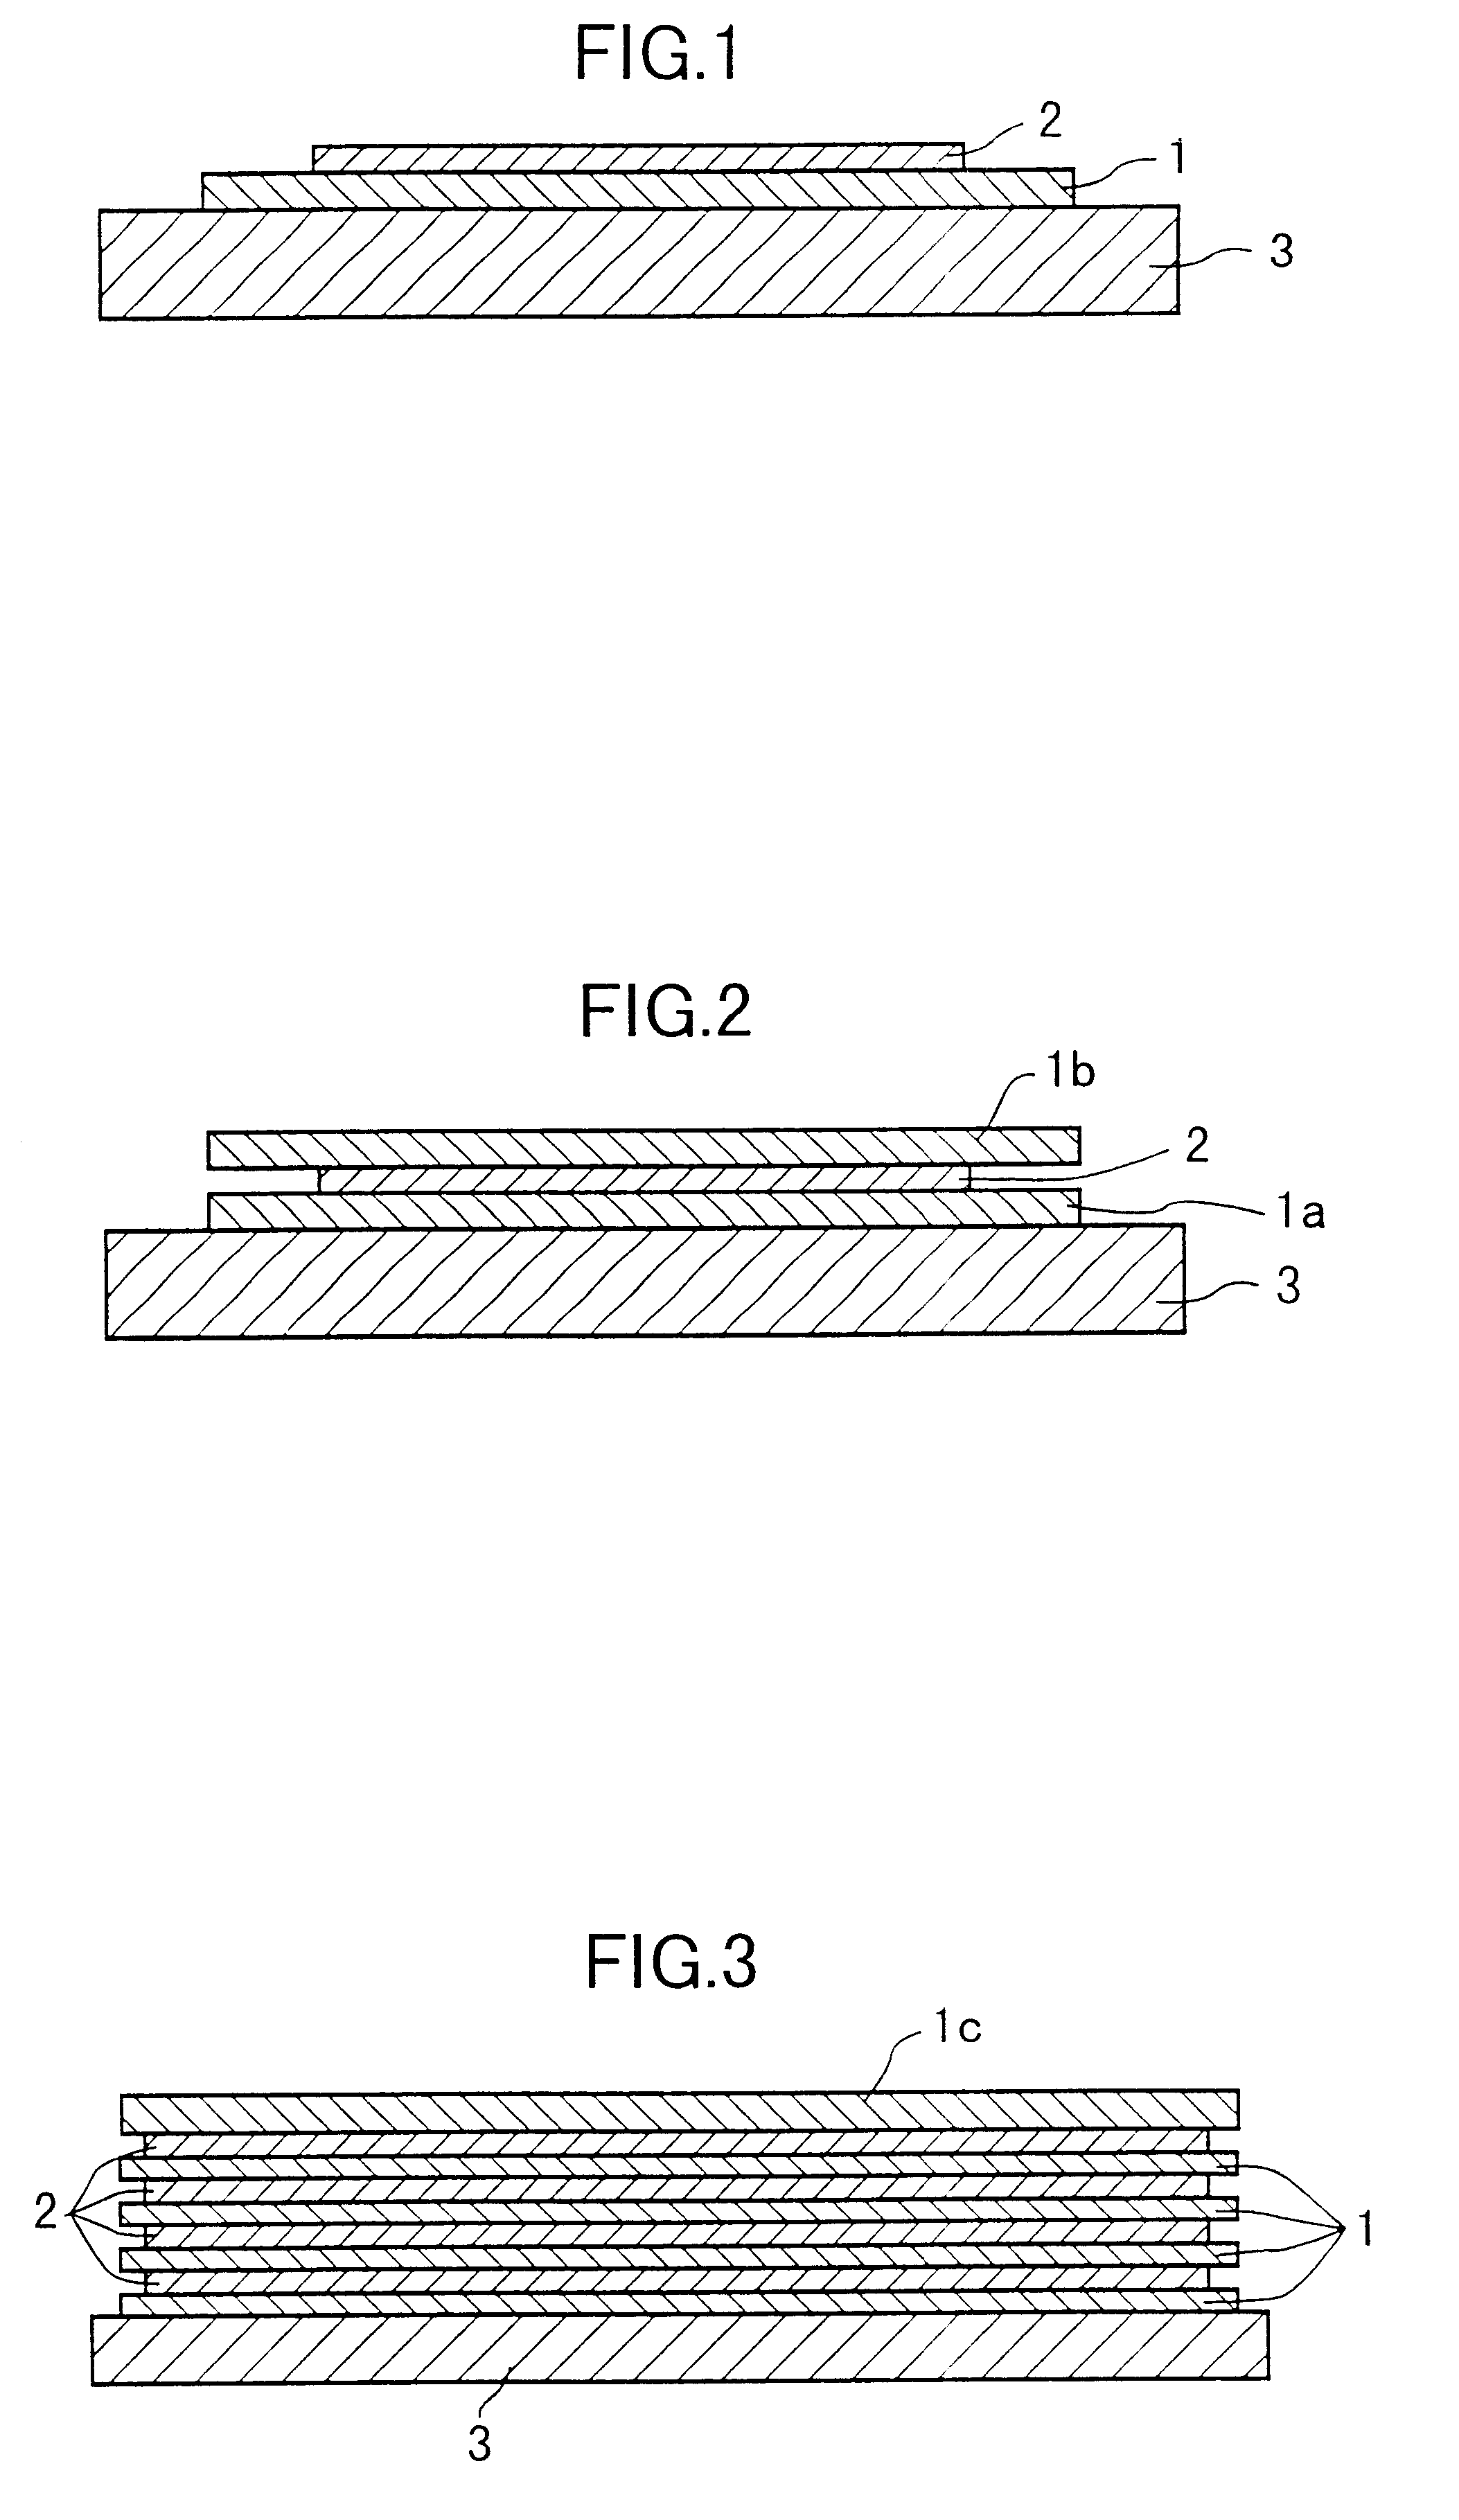 Porous ceramic sheet, process for producing the same, and setter for use in the process